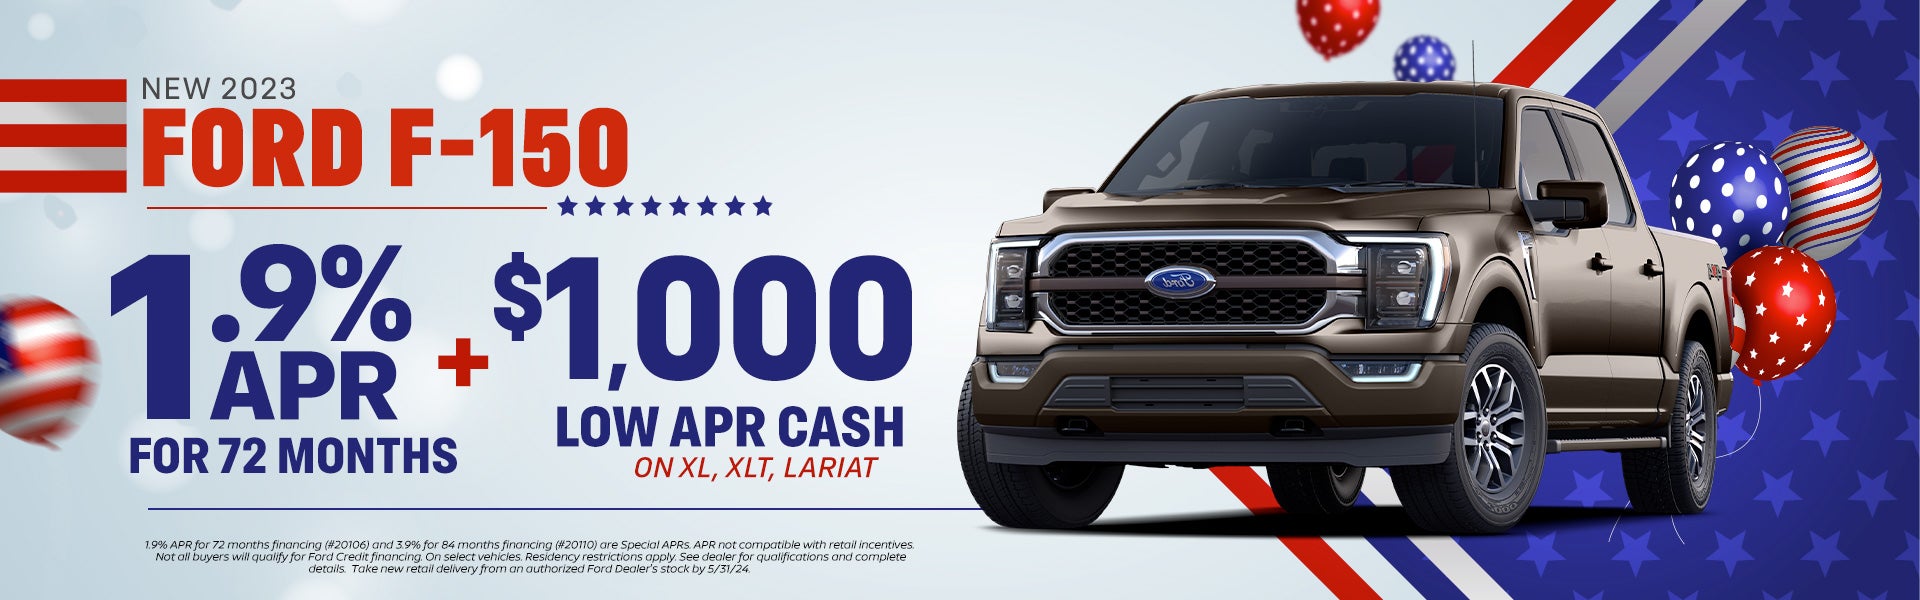 2023 Ford F-150 1.9% for 72 months plus $1500 Low APR Cash o